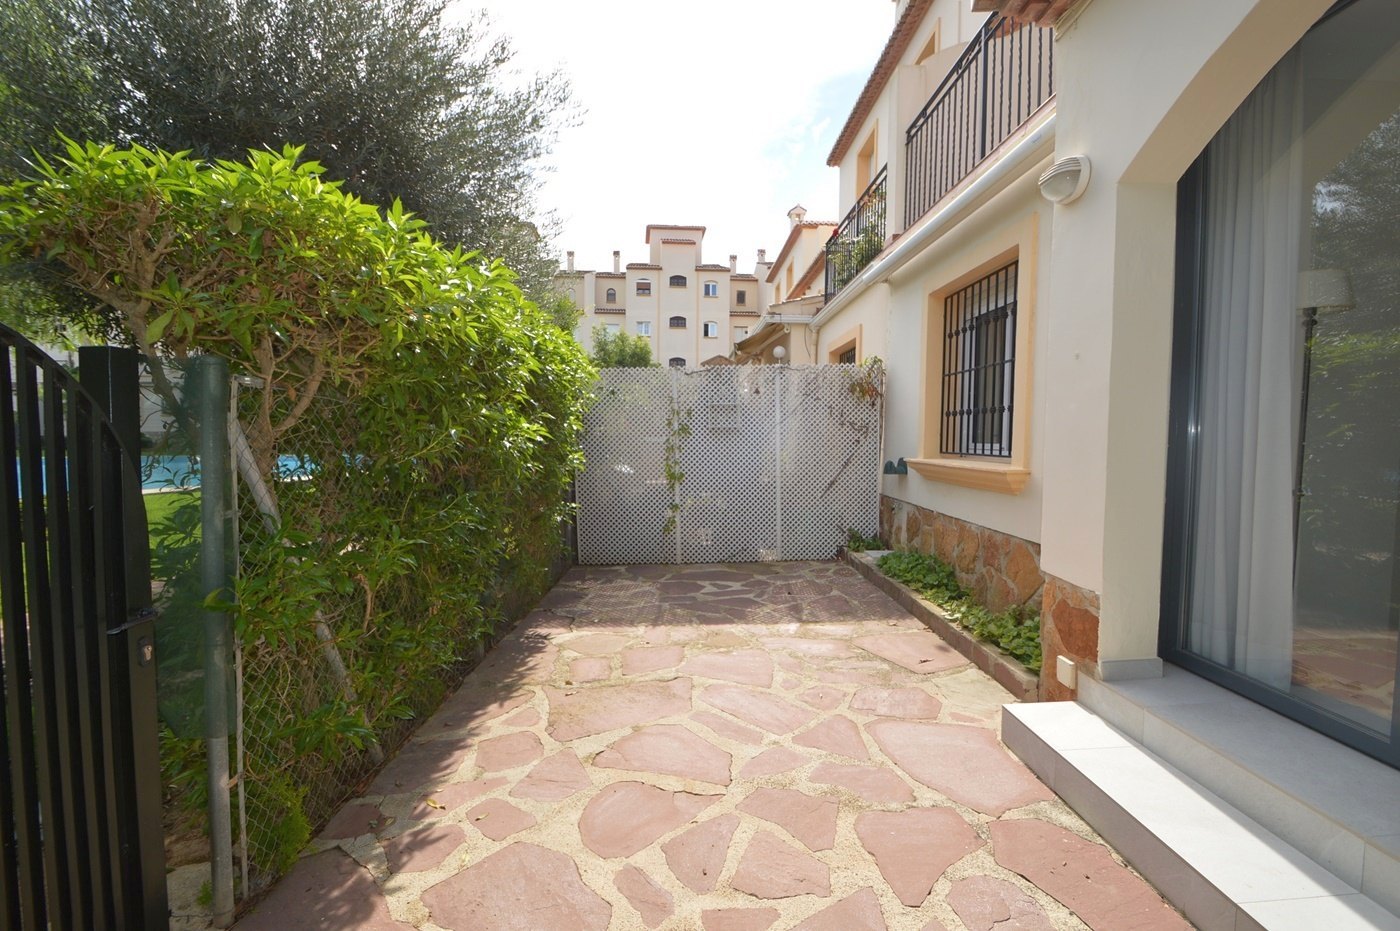 Beautuful Townhouse For Sale in Javea, at walking distance to the beach